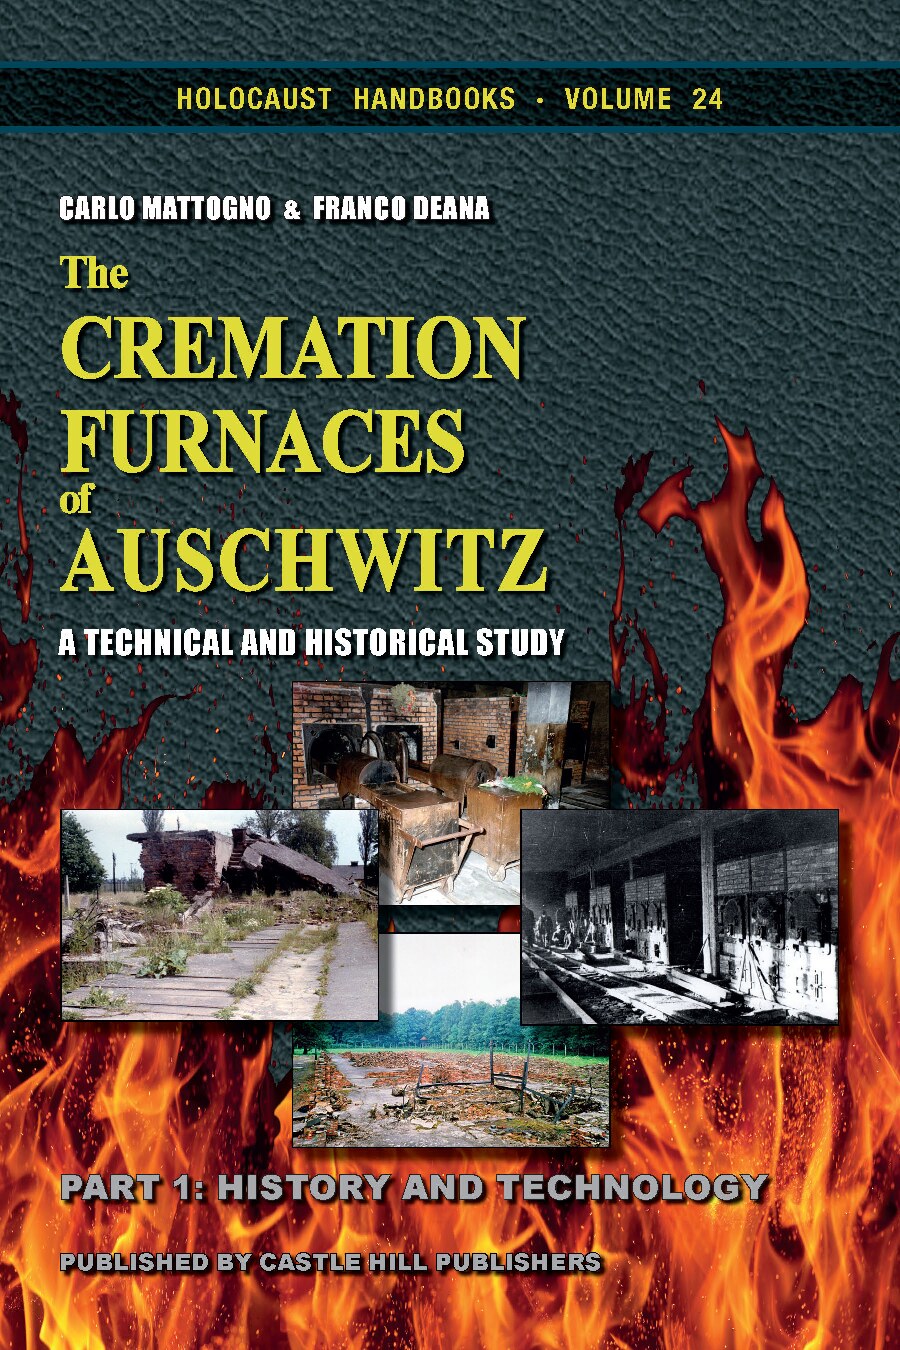 The Cremation Furnaces of Auschwitz:  A Technical and Historical Study